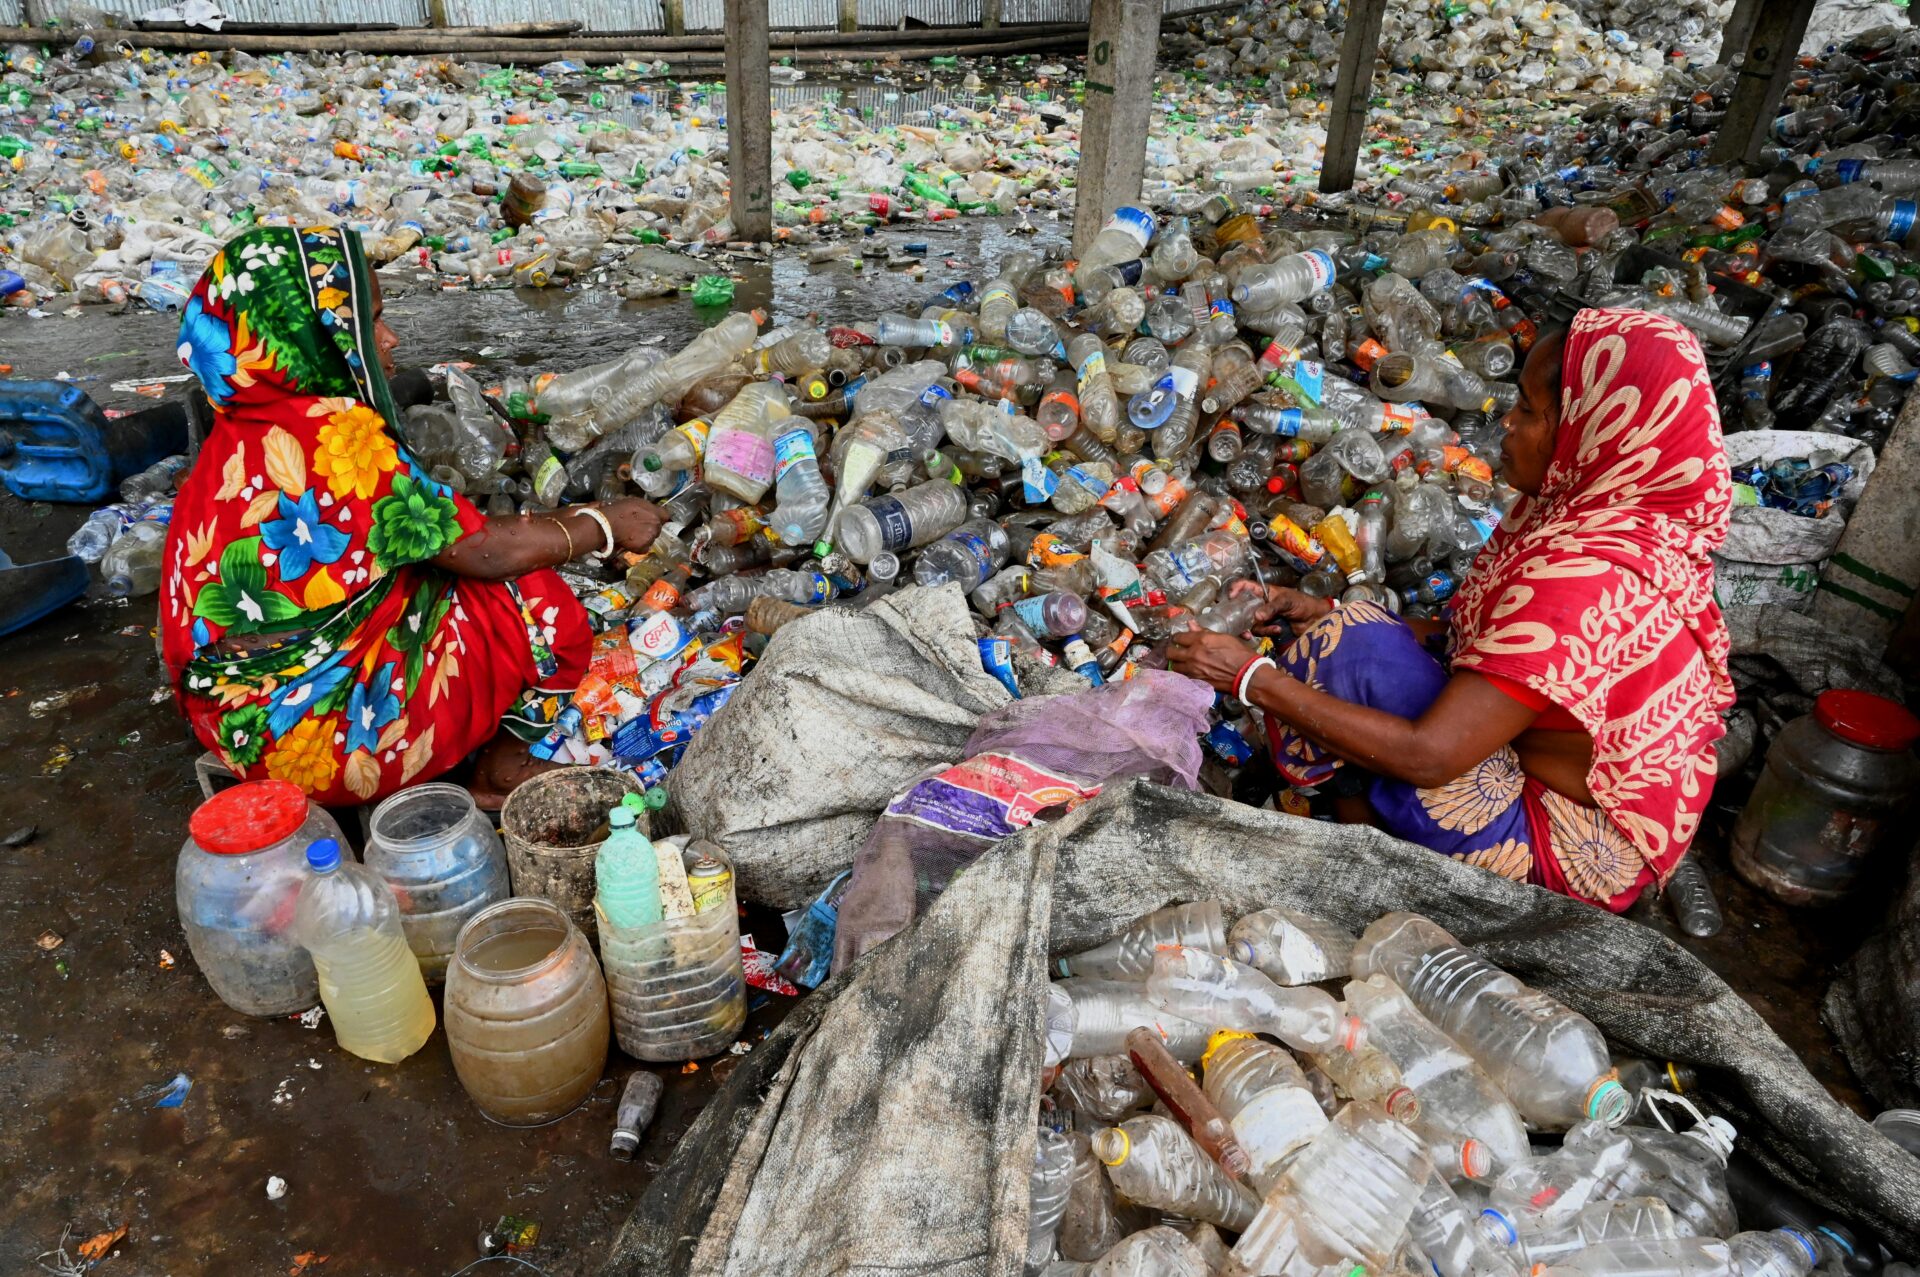 Indonesia's Plan to Reduce 70% of Plastic Waste by 2025 zonaebt.com